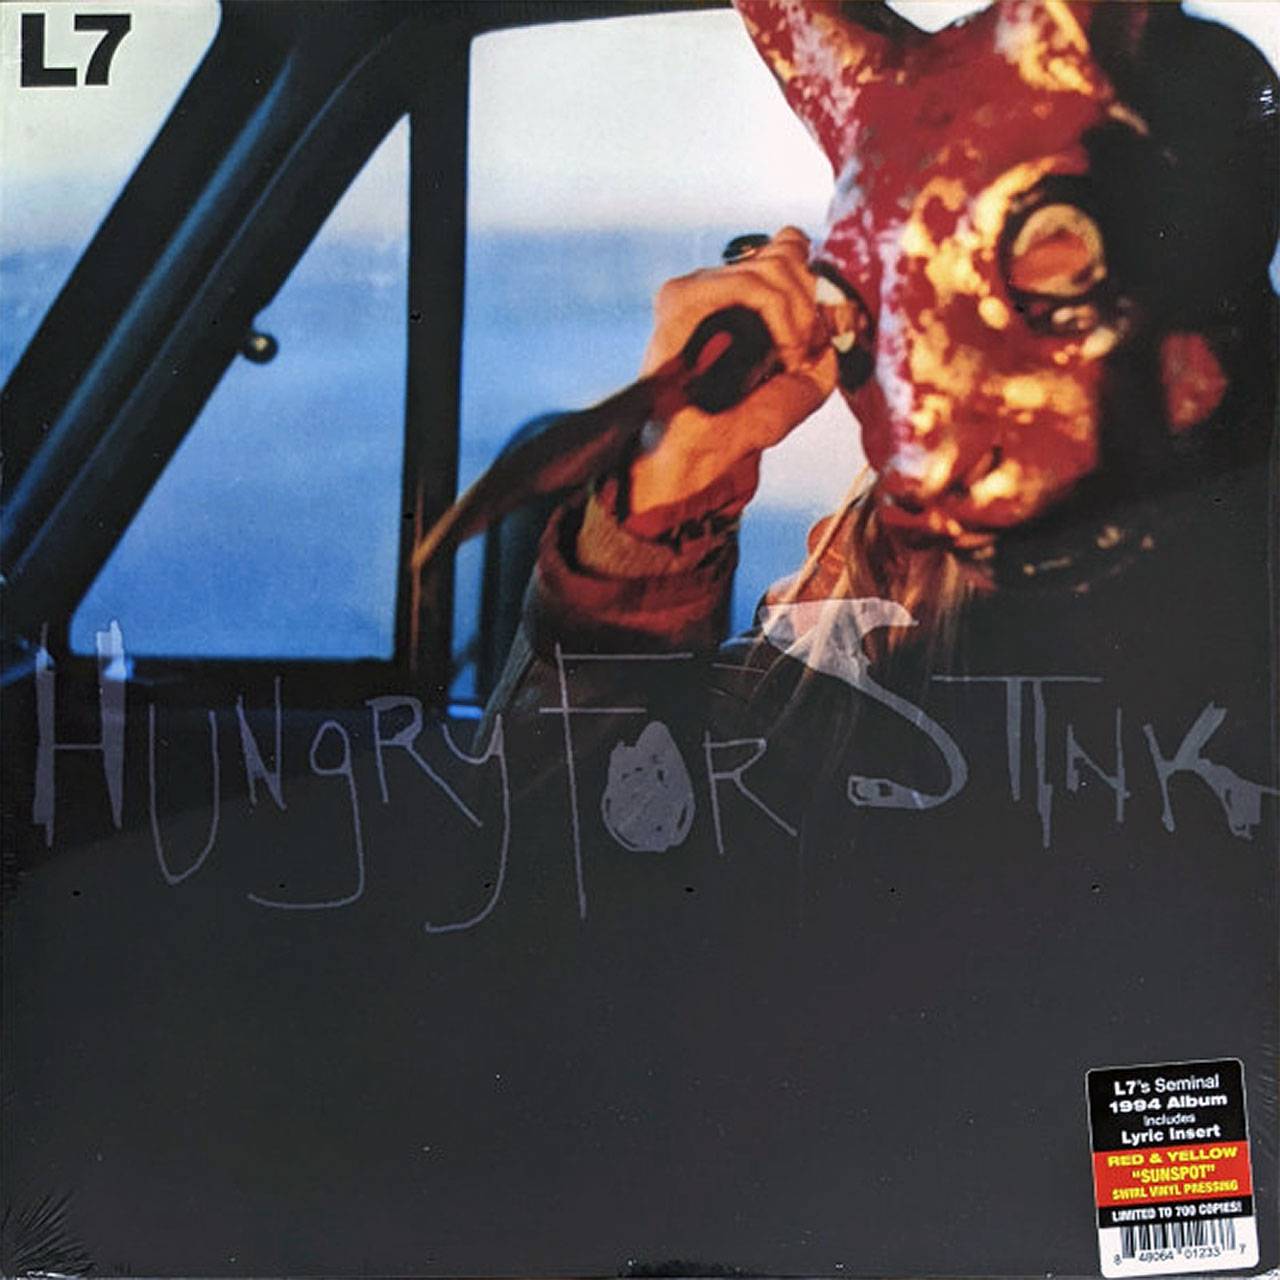 L7 - Hungry For Stink Ltd. Ed. Red & Yellow Swirl